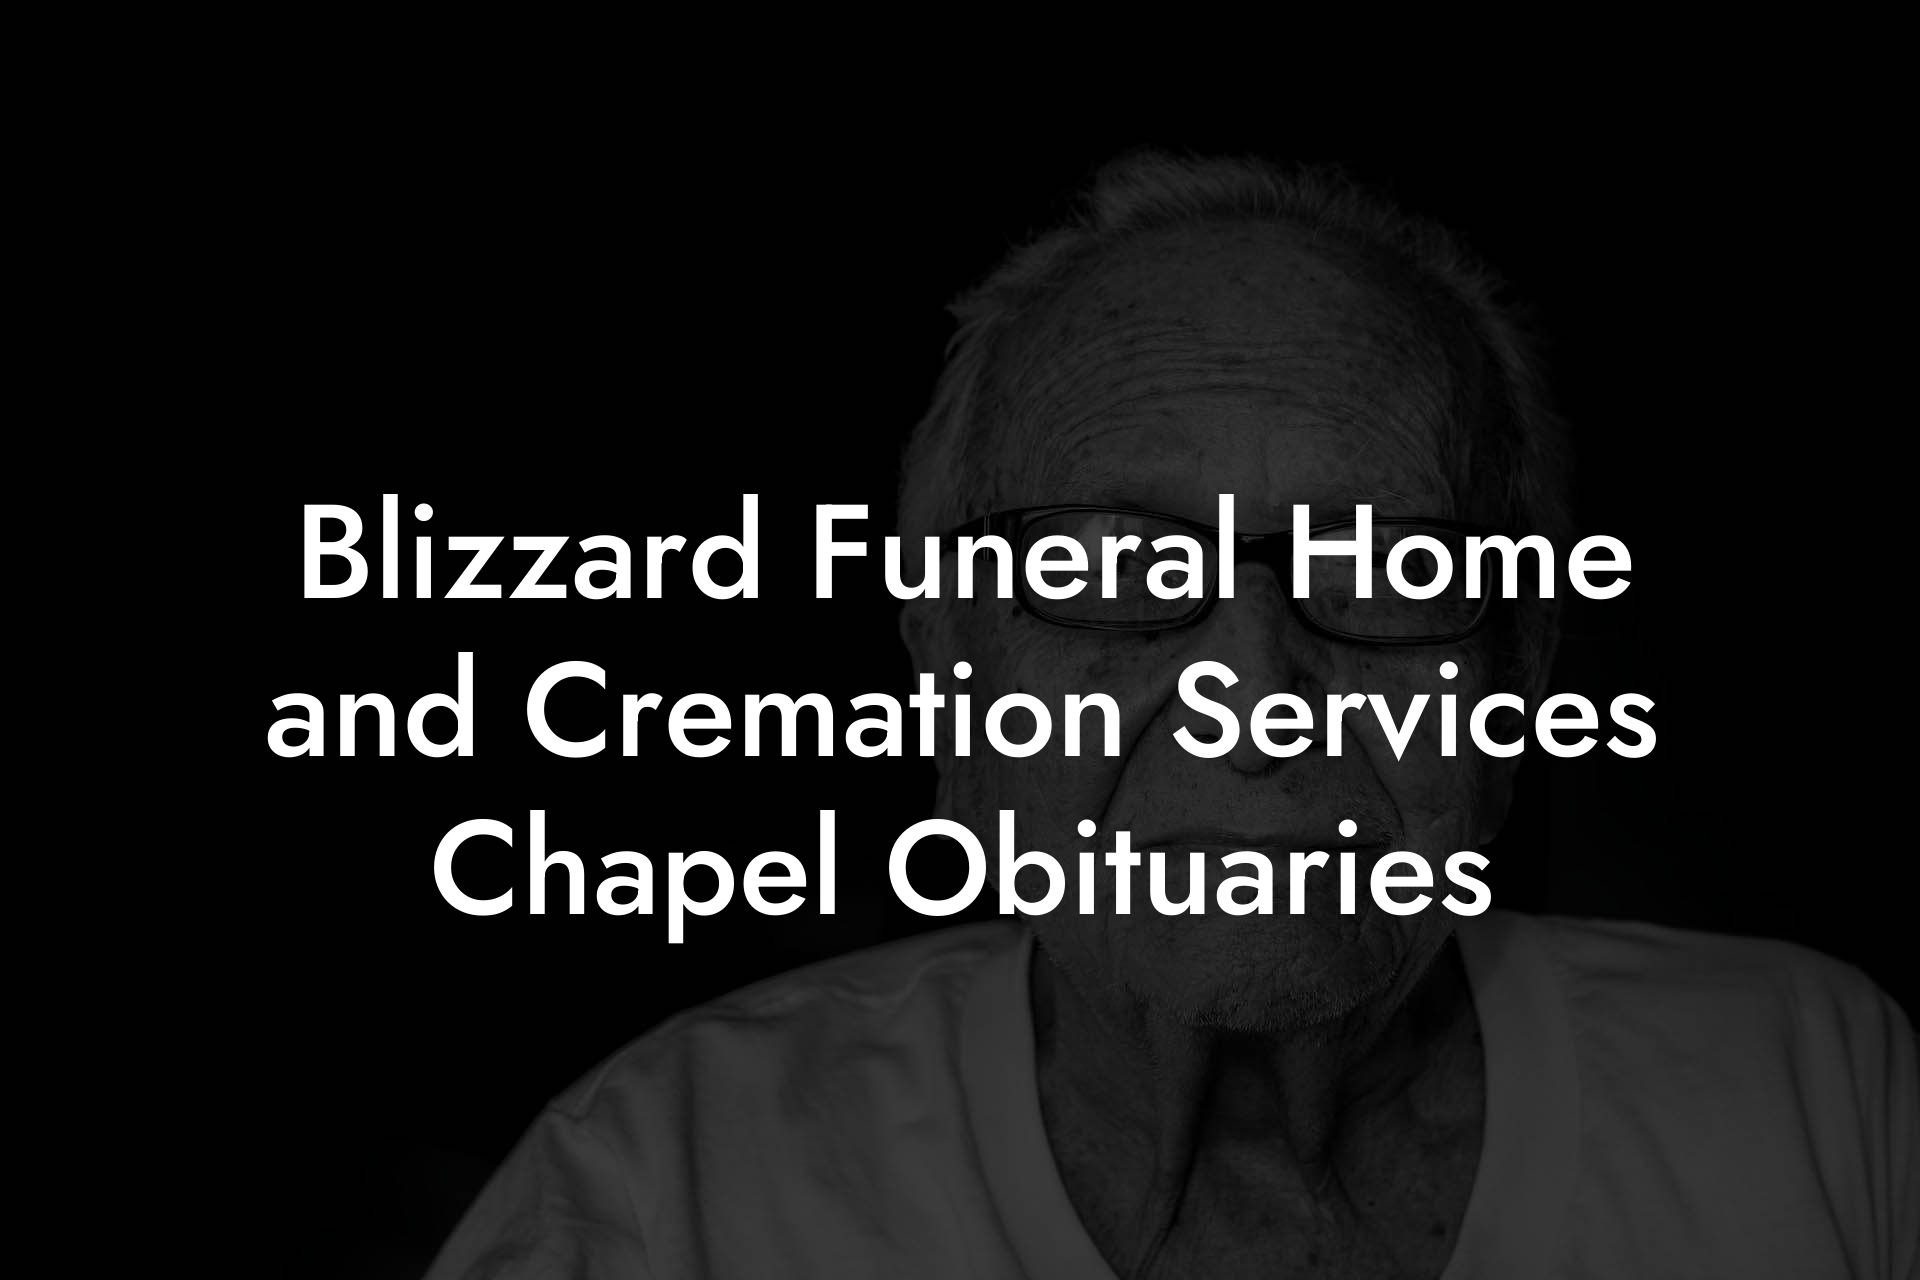 Blizzard Funeral Home and Cremation Services Chapel Obituaries